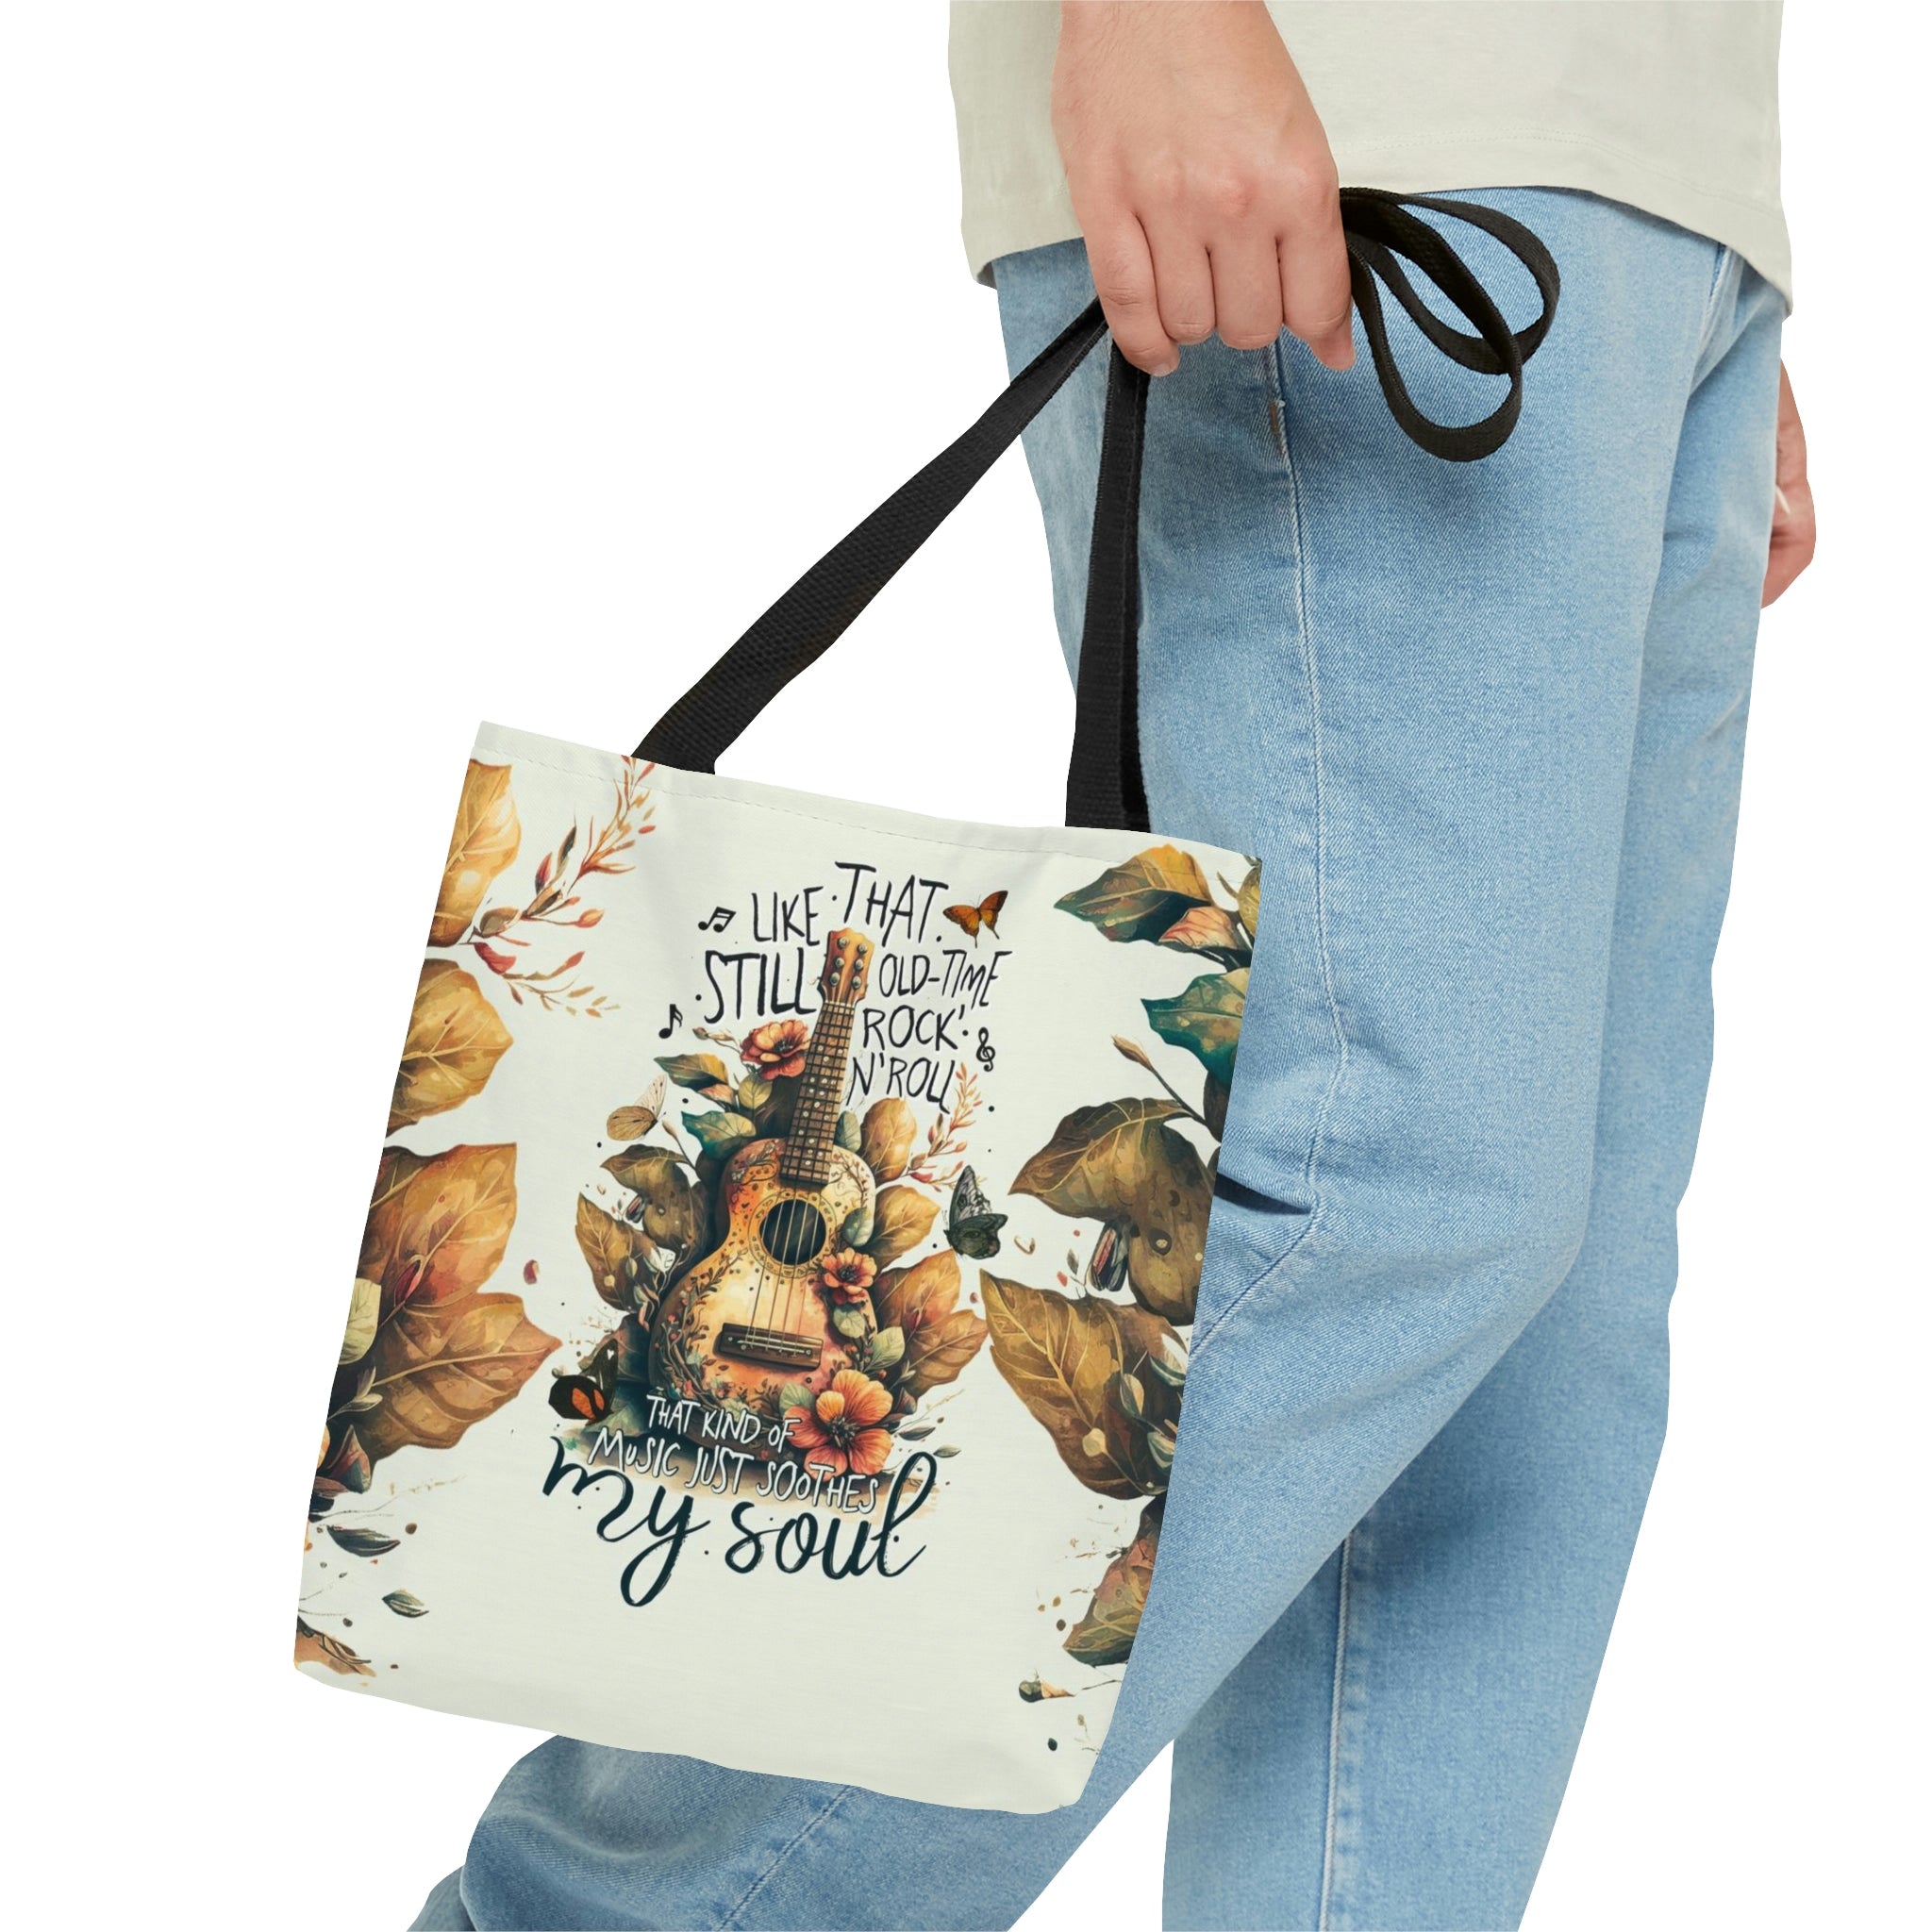 MUSIC JUST SOOTHES MY SOUL TOTE BAG - TY1704235